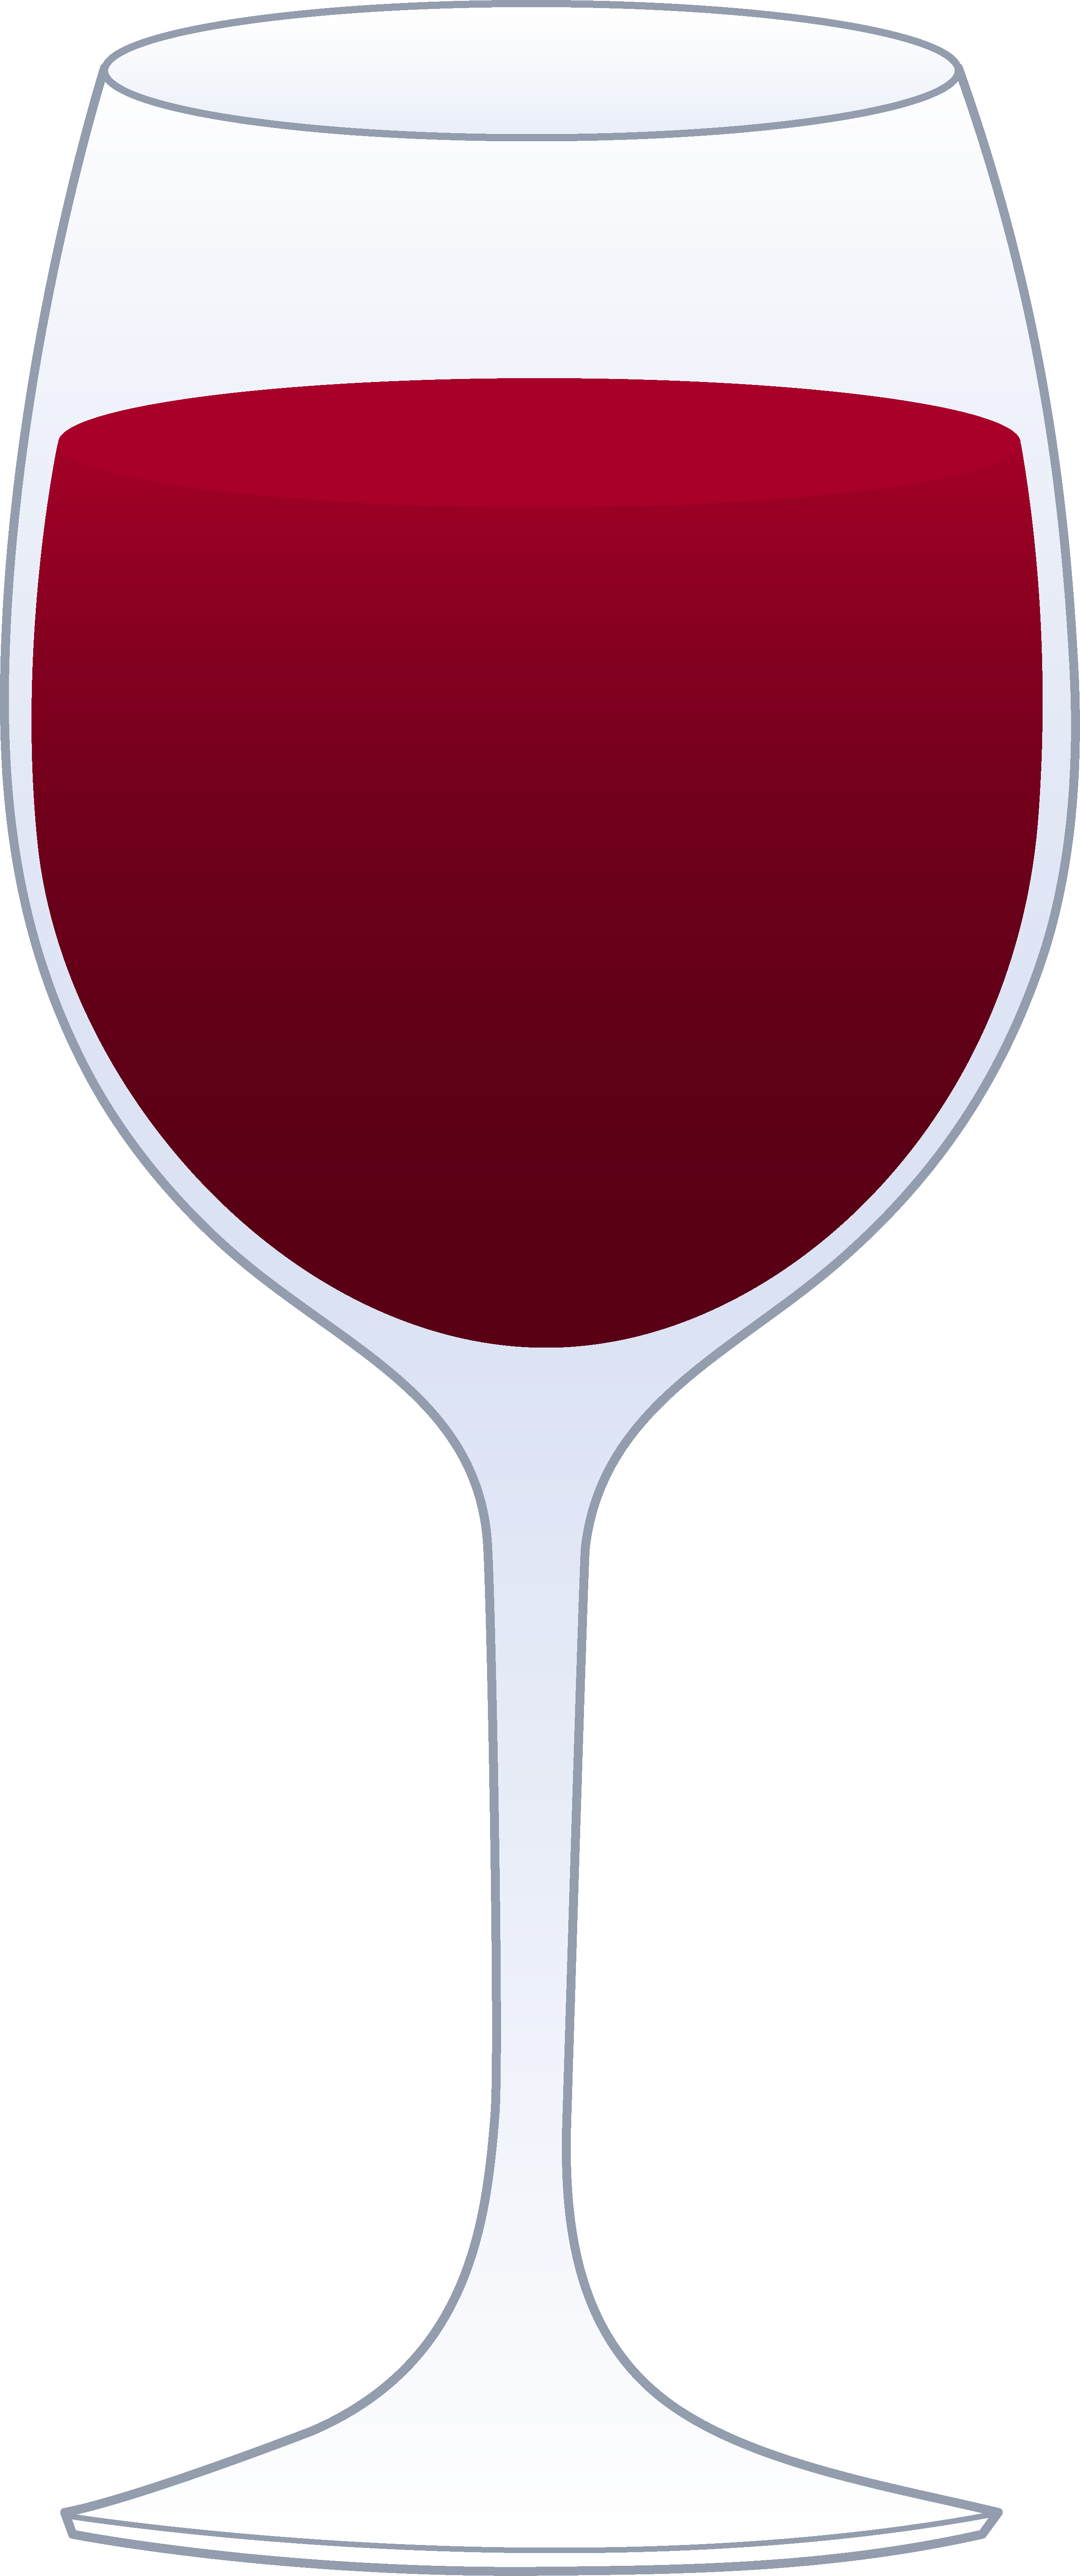 Clipart images of wine glasses